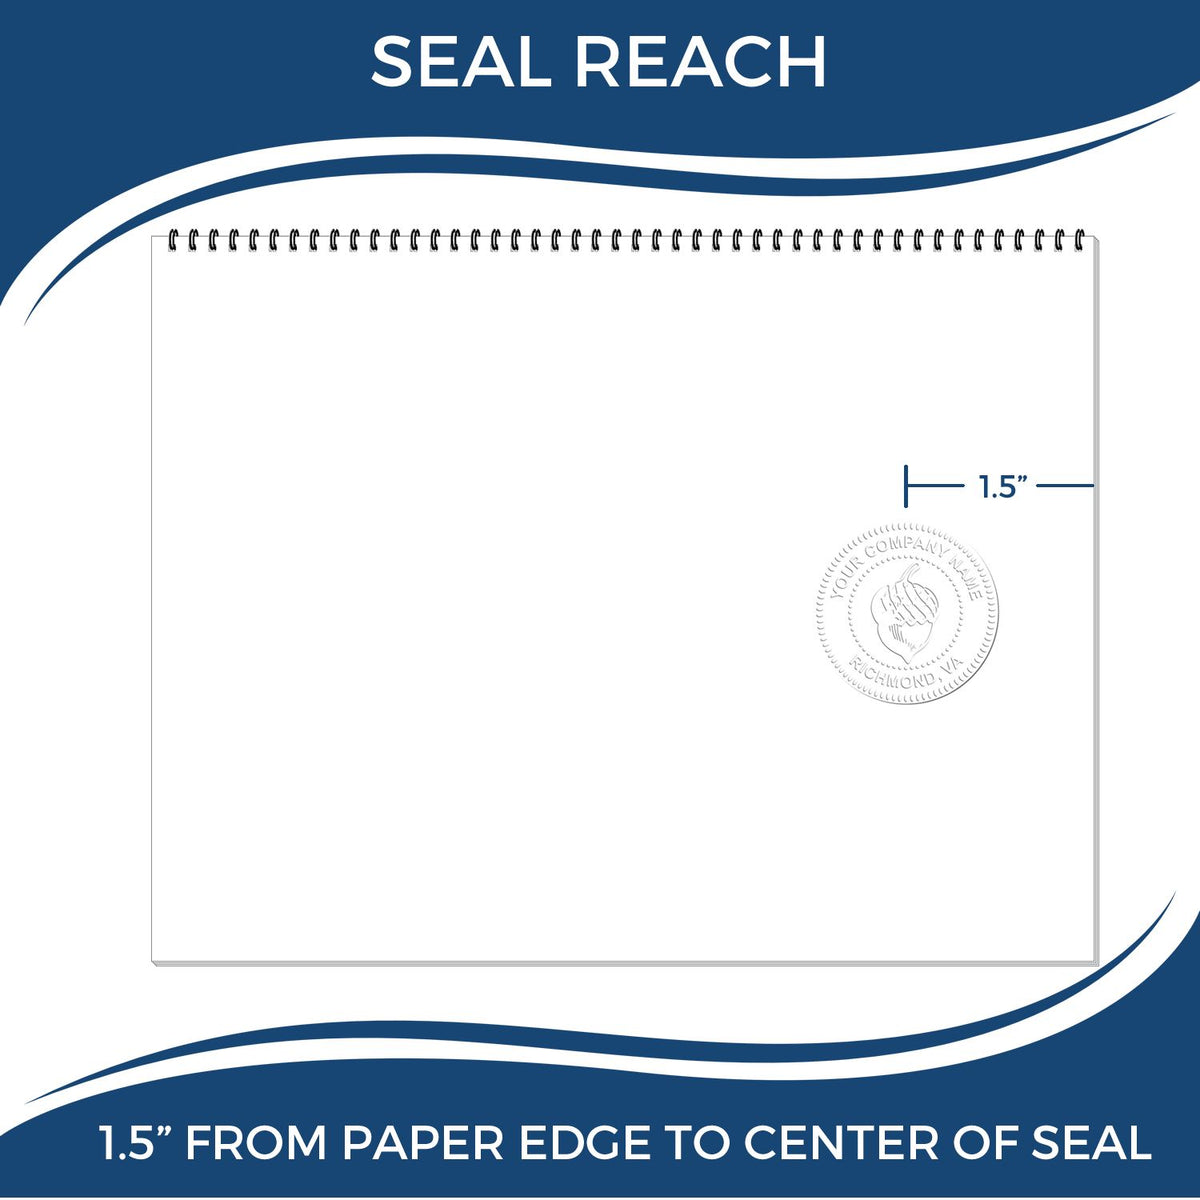 An infographic showing the seal reach which is represented by a ruler and a miniature seal image of the Gift Tennessee Geologist Seal